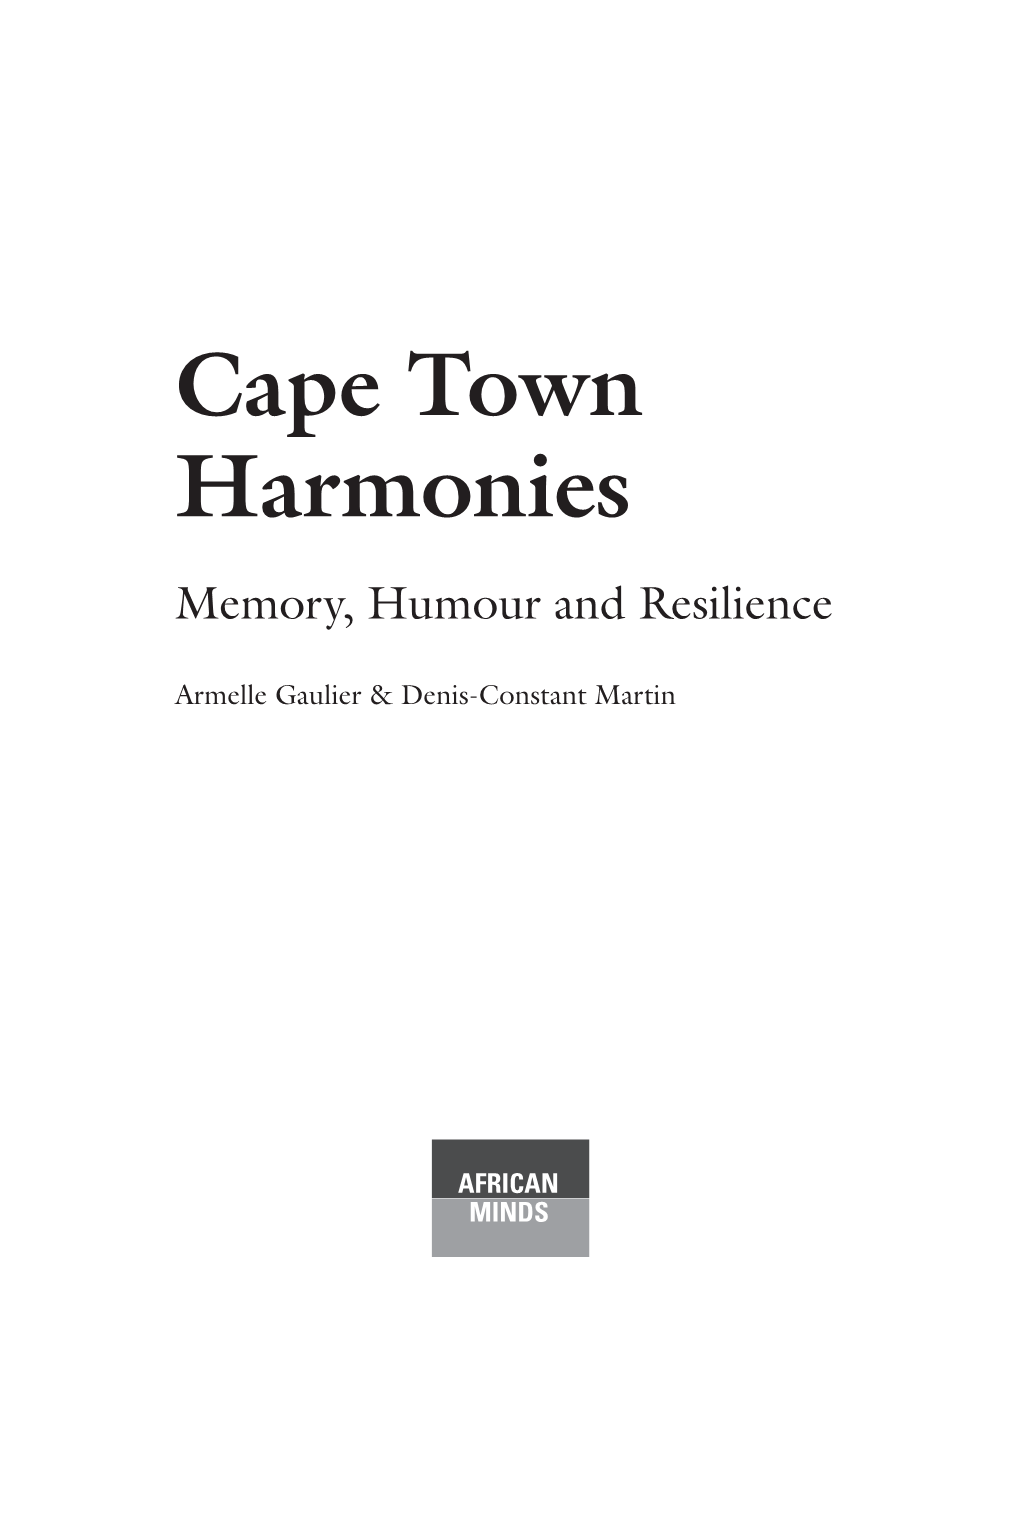 AM Cape Town Harmonies TEXT.Indd